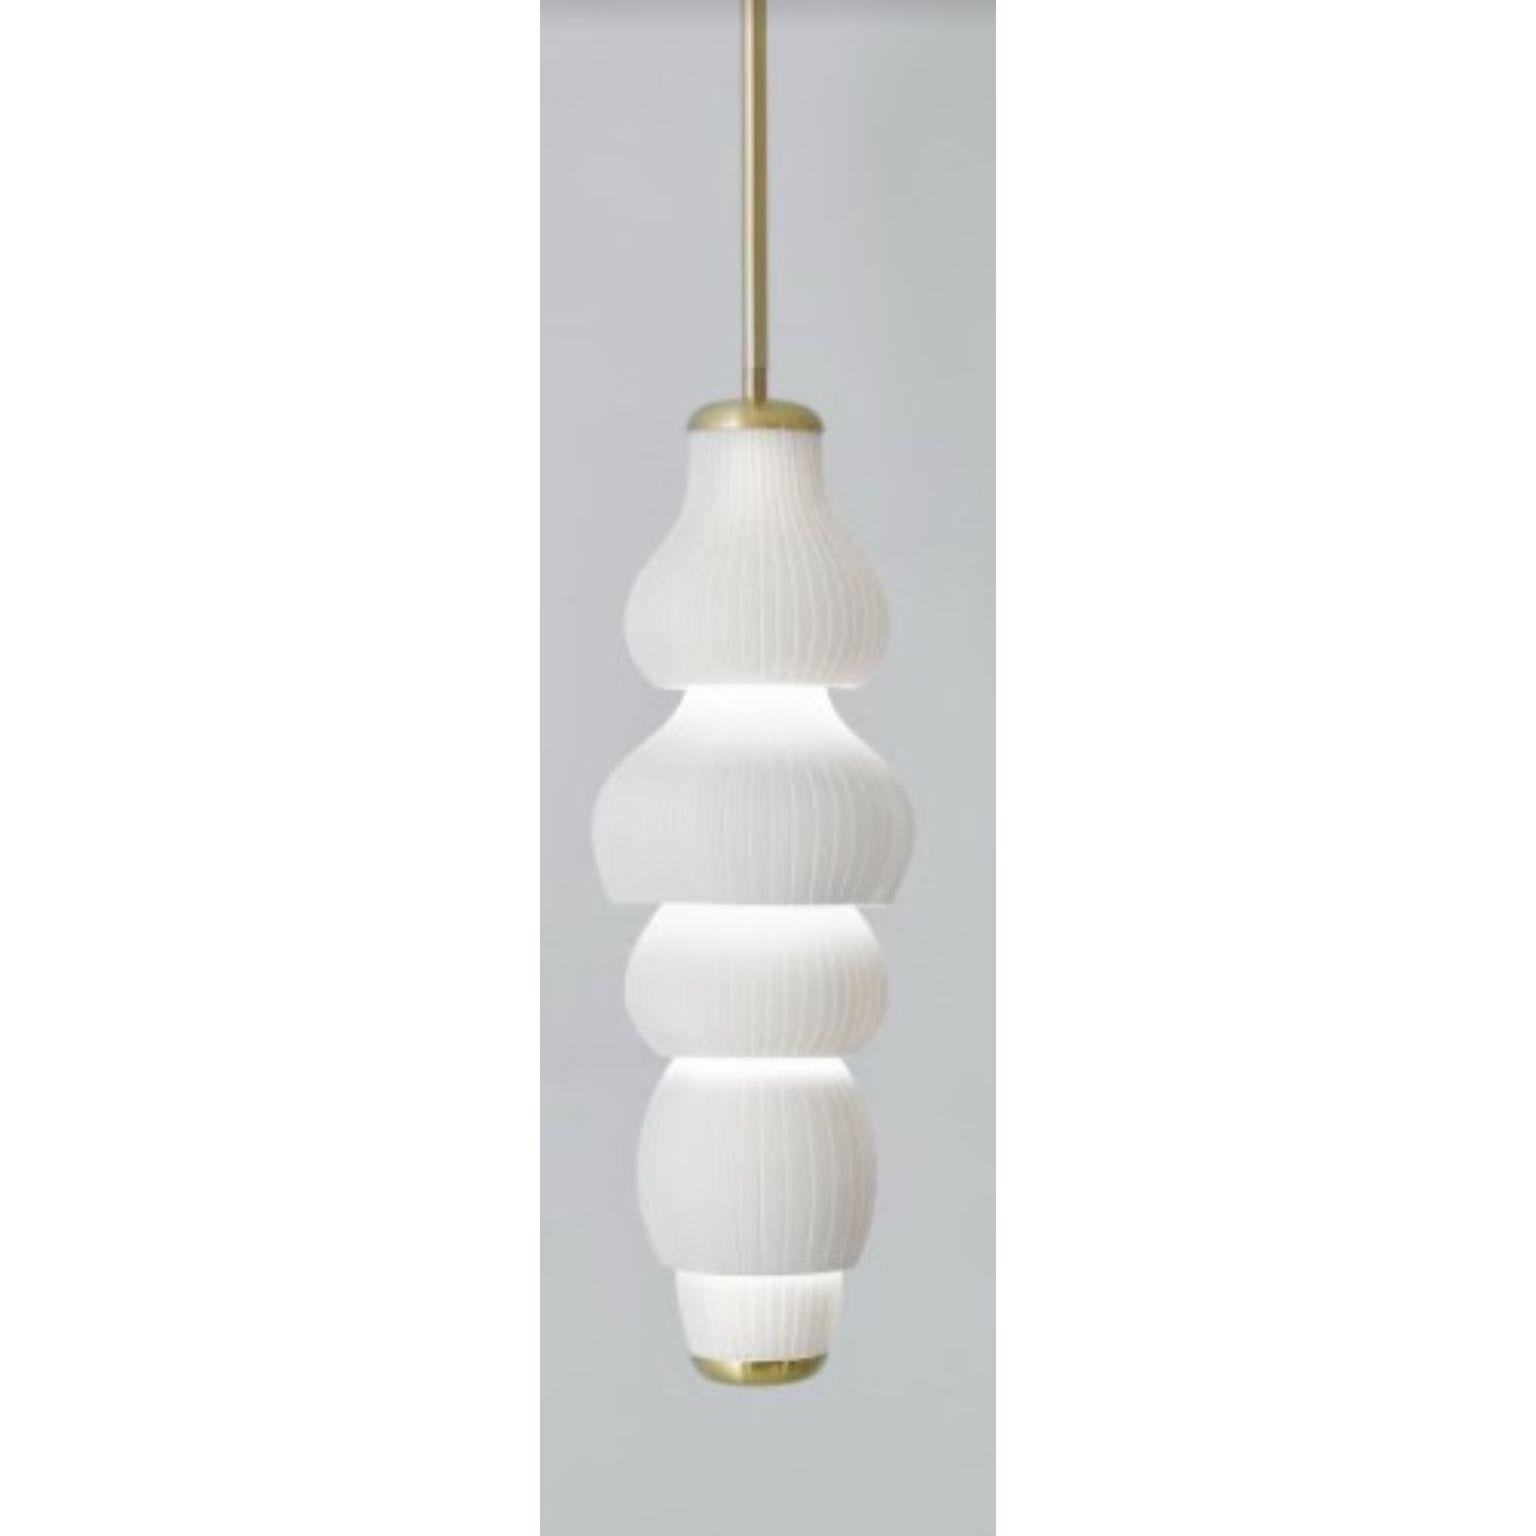 Glaïeul large pendant light by Mydriaz
Dimensions: D 26 x H 100 cm 
Materials: Brushed brass, pale gold finish, biscuit ceramic.
Adjustable measure.

All our lamps can be wired according to each country. If sold to the USA it will be wired for